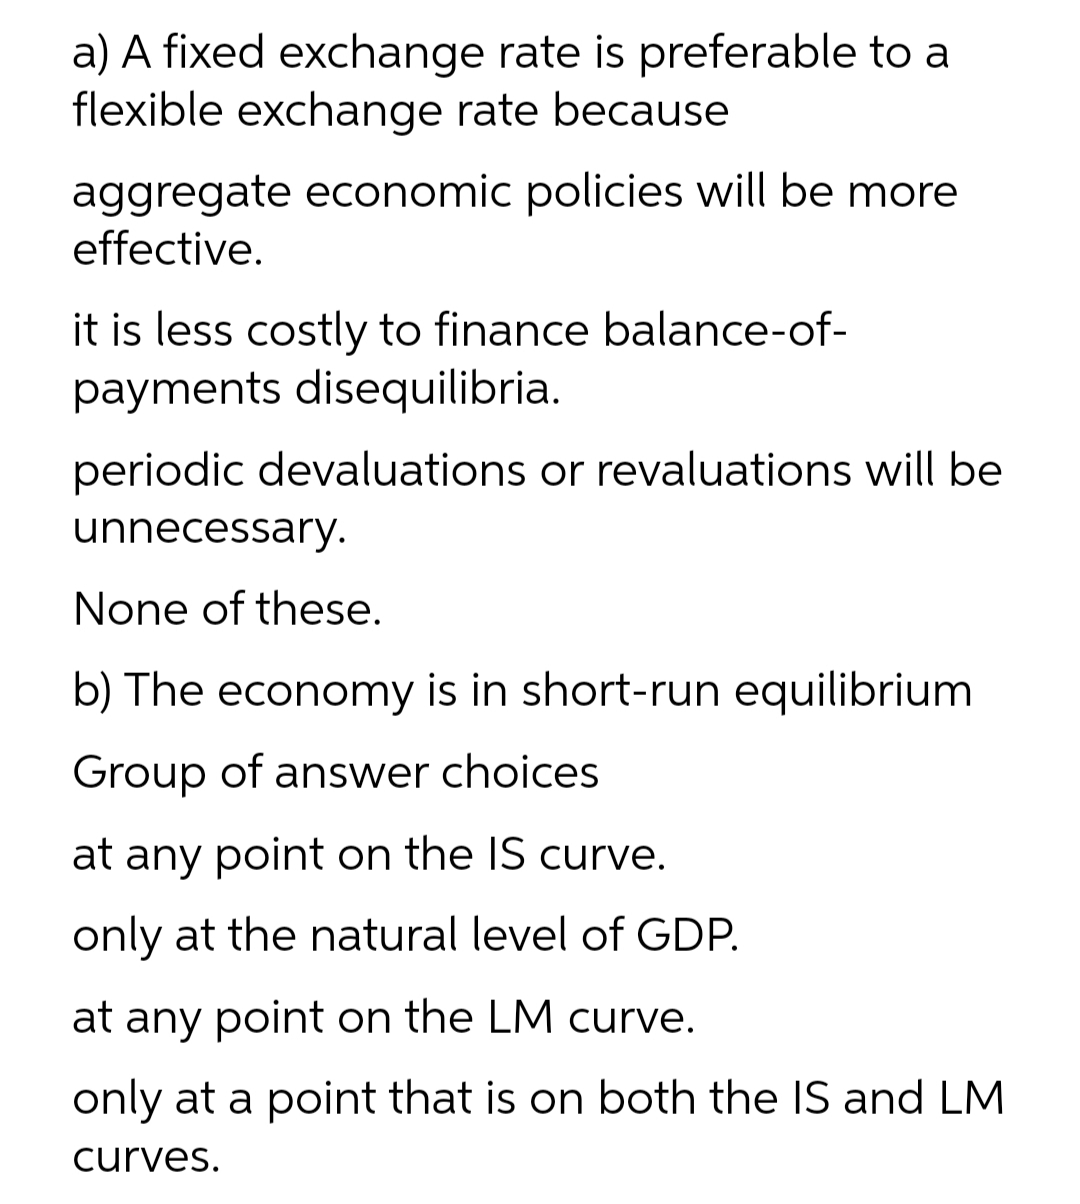 a) A fixed exchange rate is preferable to a
flexible exchange rate because
aggregate economic policies will be more
effective.
it is less costly to finance balance-of-
payments disequilibria.
periodic devaluations or revaluations will be
unnecessary.
None of these.
b) The economy is in short-run equilibrium
Group of answer choices
at any point on the IS curve.
only at the natural level of GDP.
at any point on the LM curve.
only at a point that is on both the IS and LM
curves.
